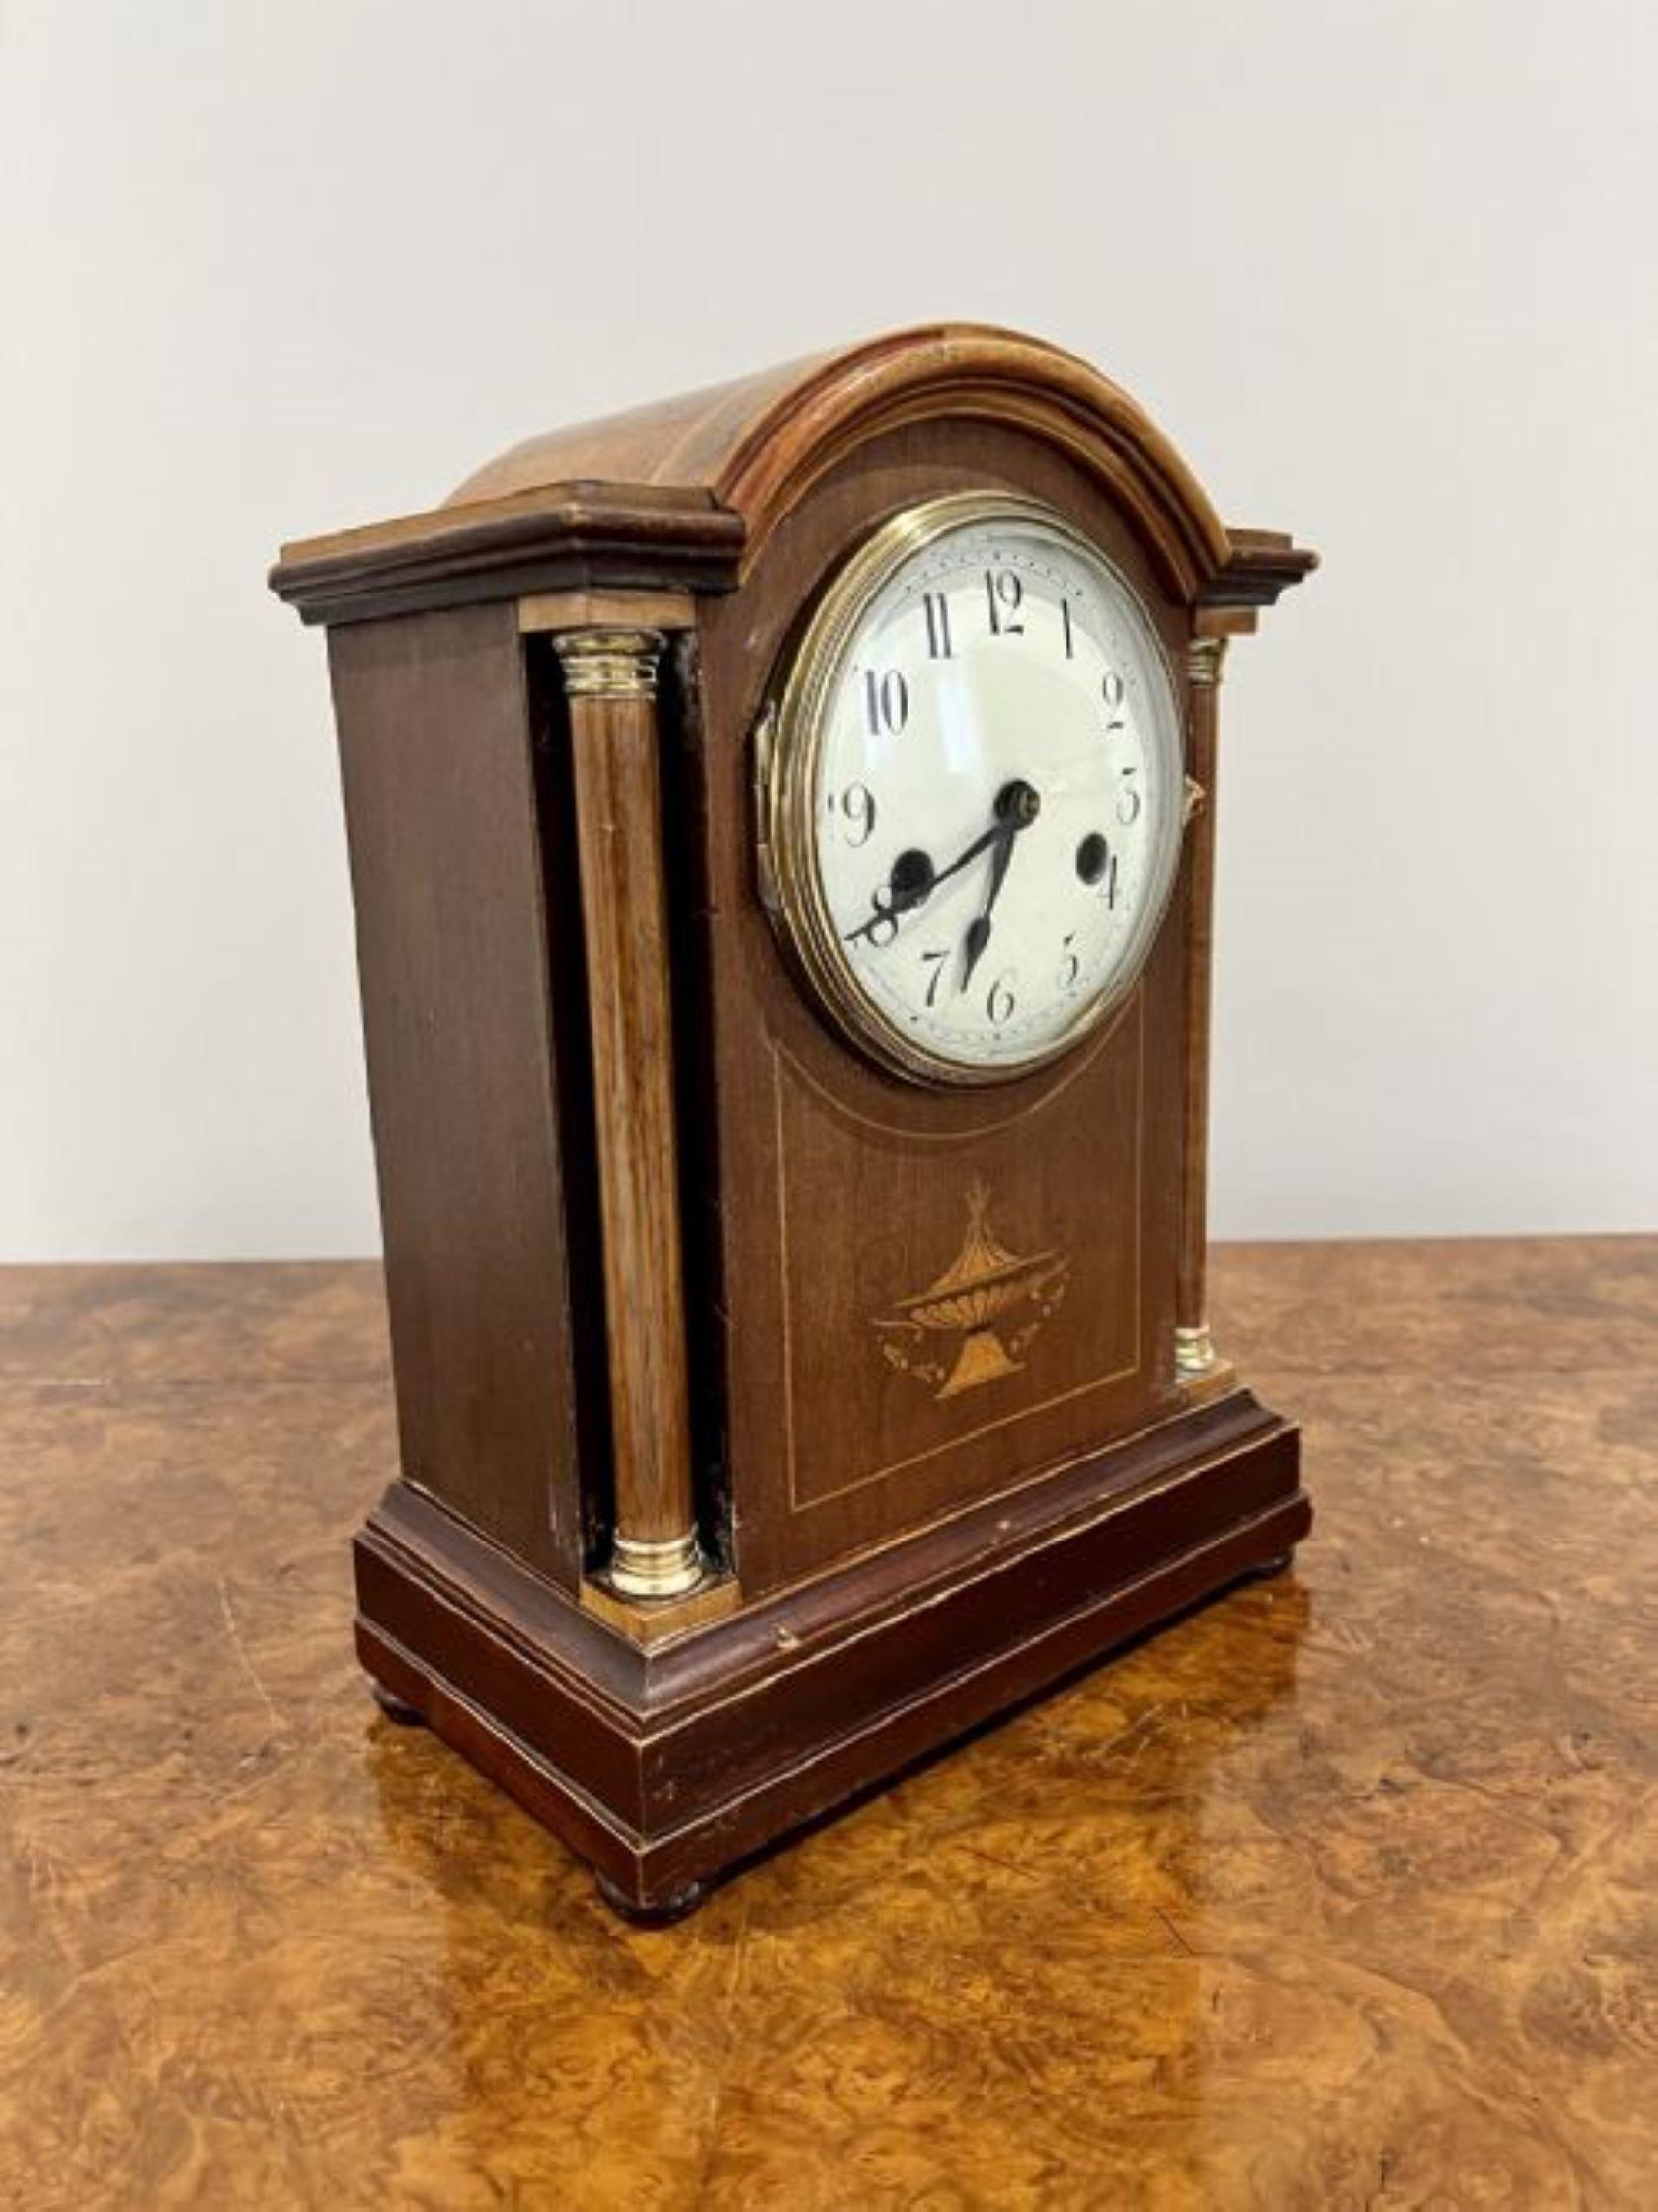 Antique Edwardian quality mahogany inlaid mantle clock having a quality mahogany inlaid case with a brass bezel, circular dial, original hands, 8 day movement striking on the hour and half hour on a gong with the original key
Please note all of our